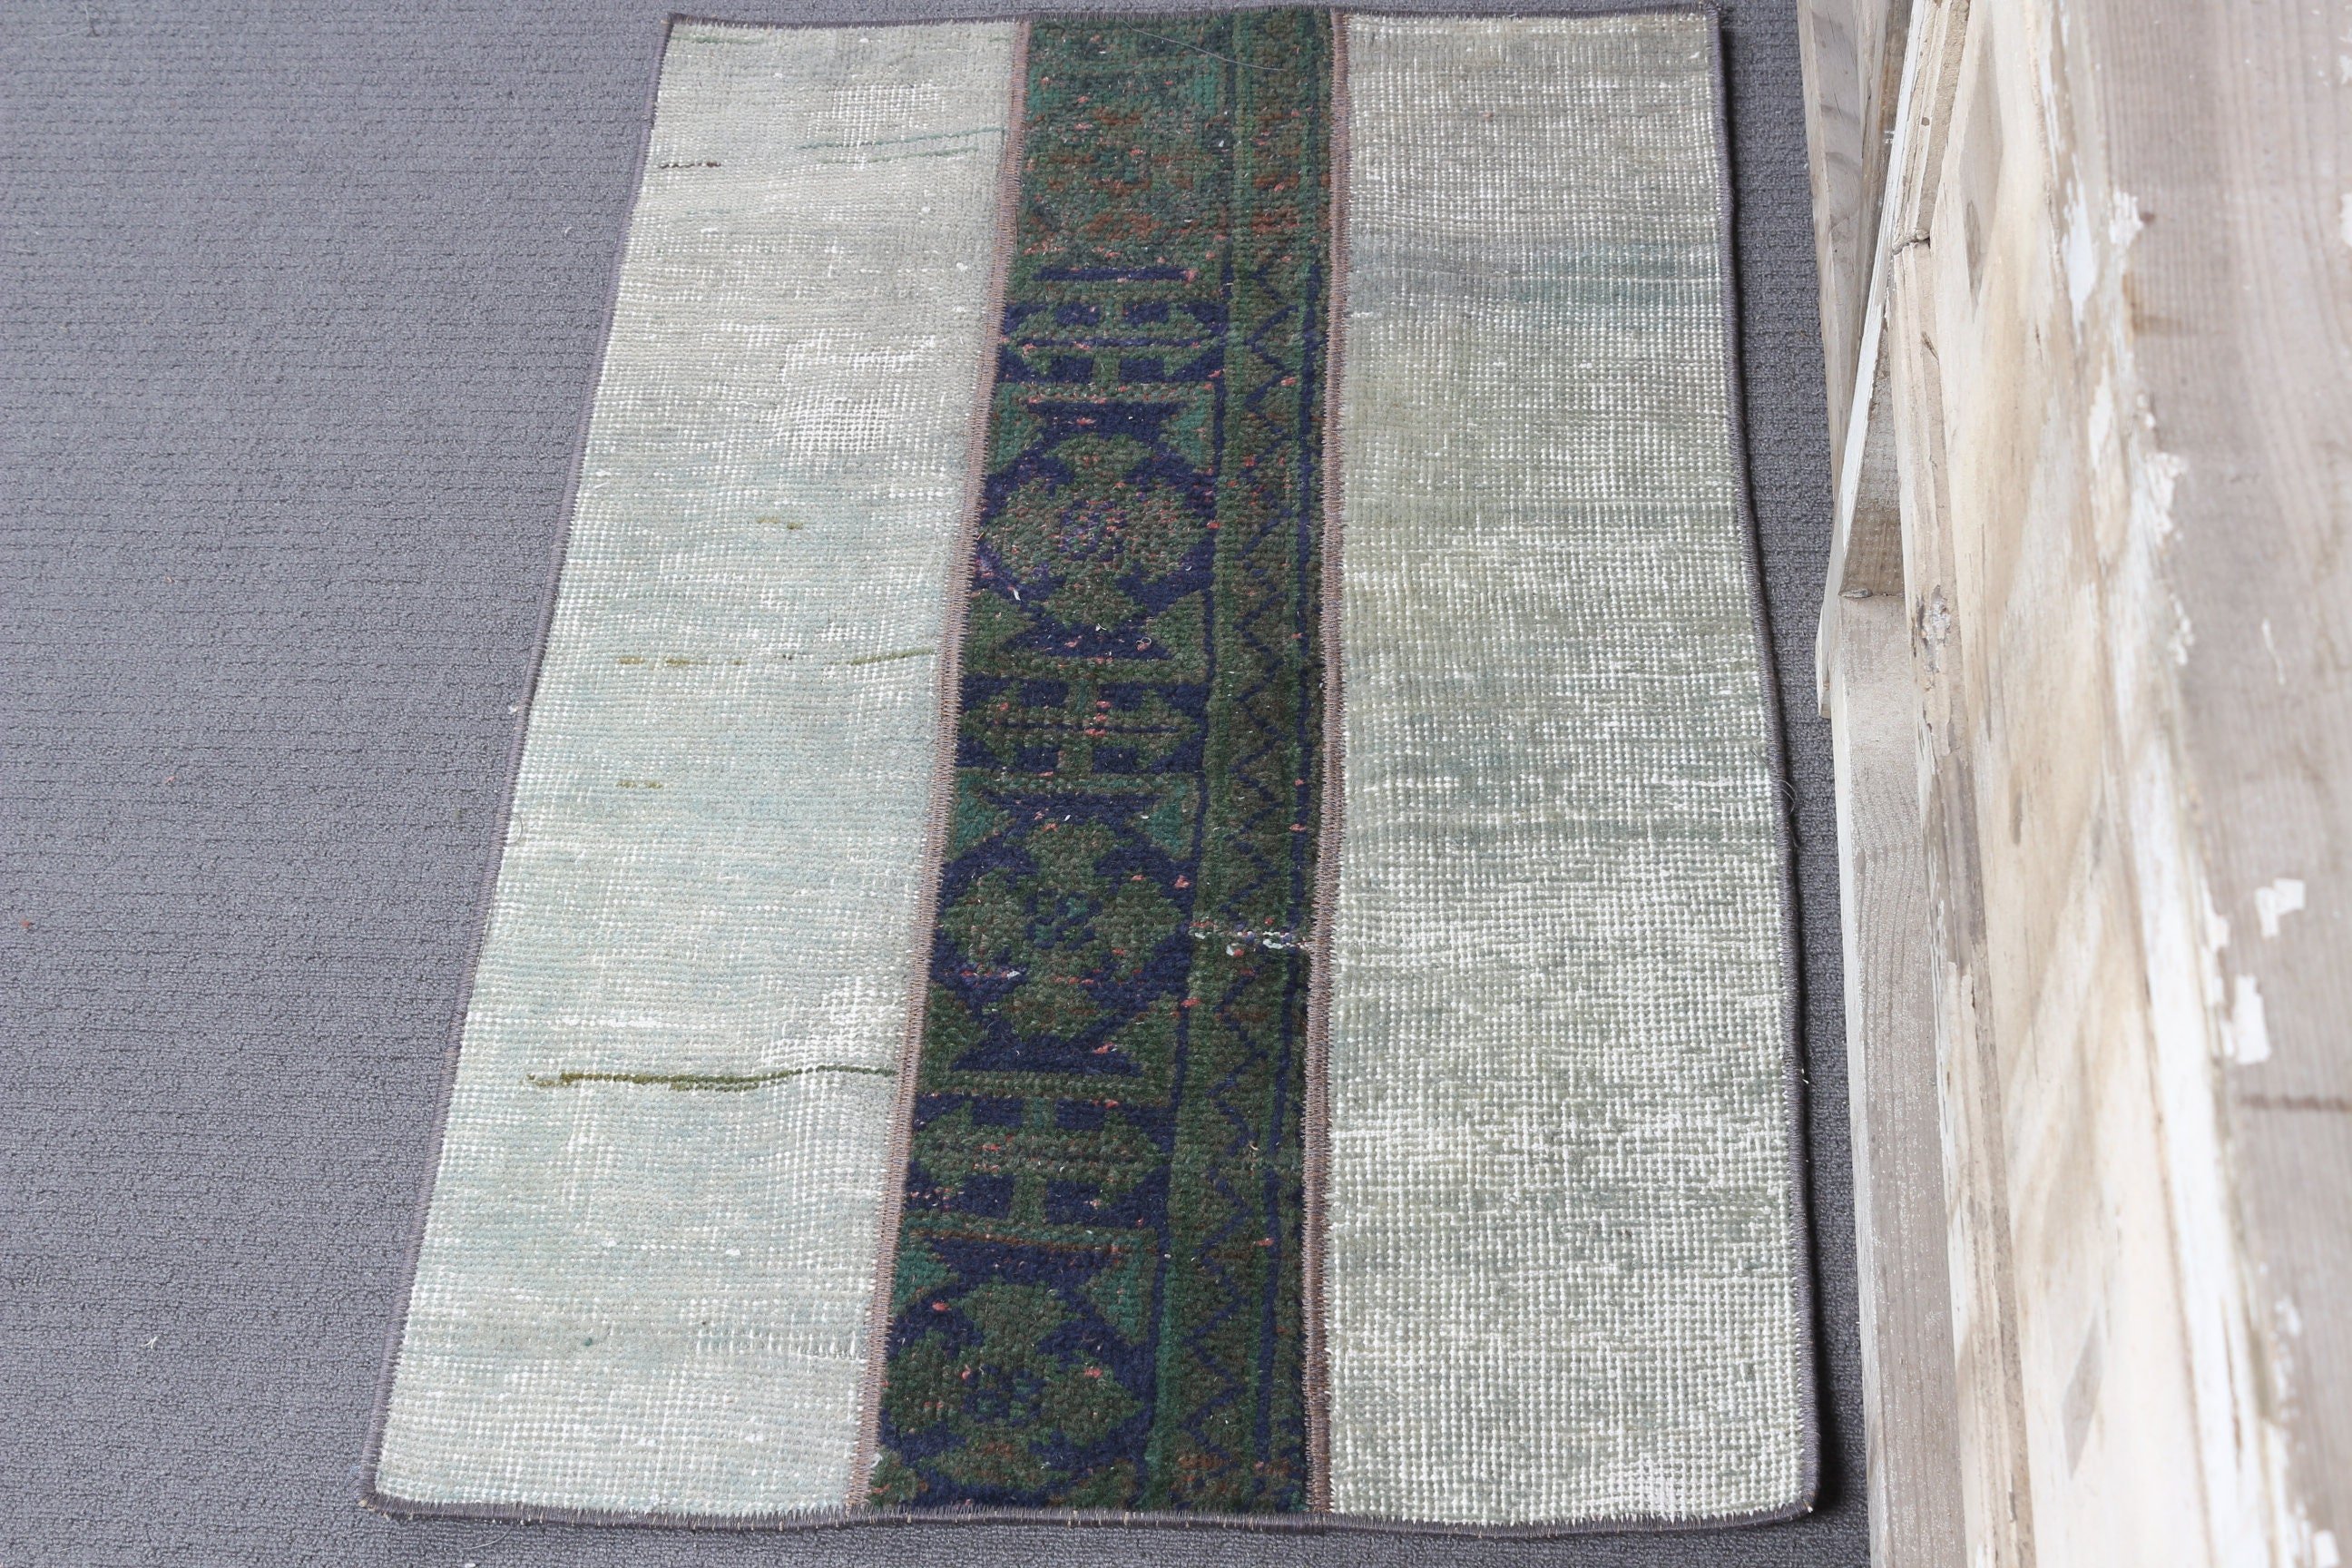 Green Moroccan Rugs, 1.9x3 ft Small Rugs, Rugs for Bath, Turkish Rugs, Cool Rugs, Oushak Rug, Wall Hanging Rugs, Vintage Rugs, Car Mat Rug